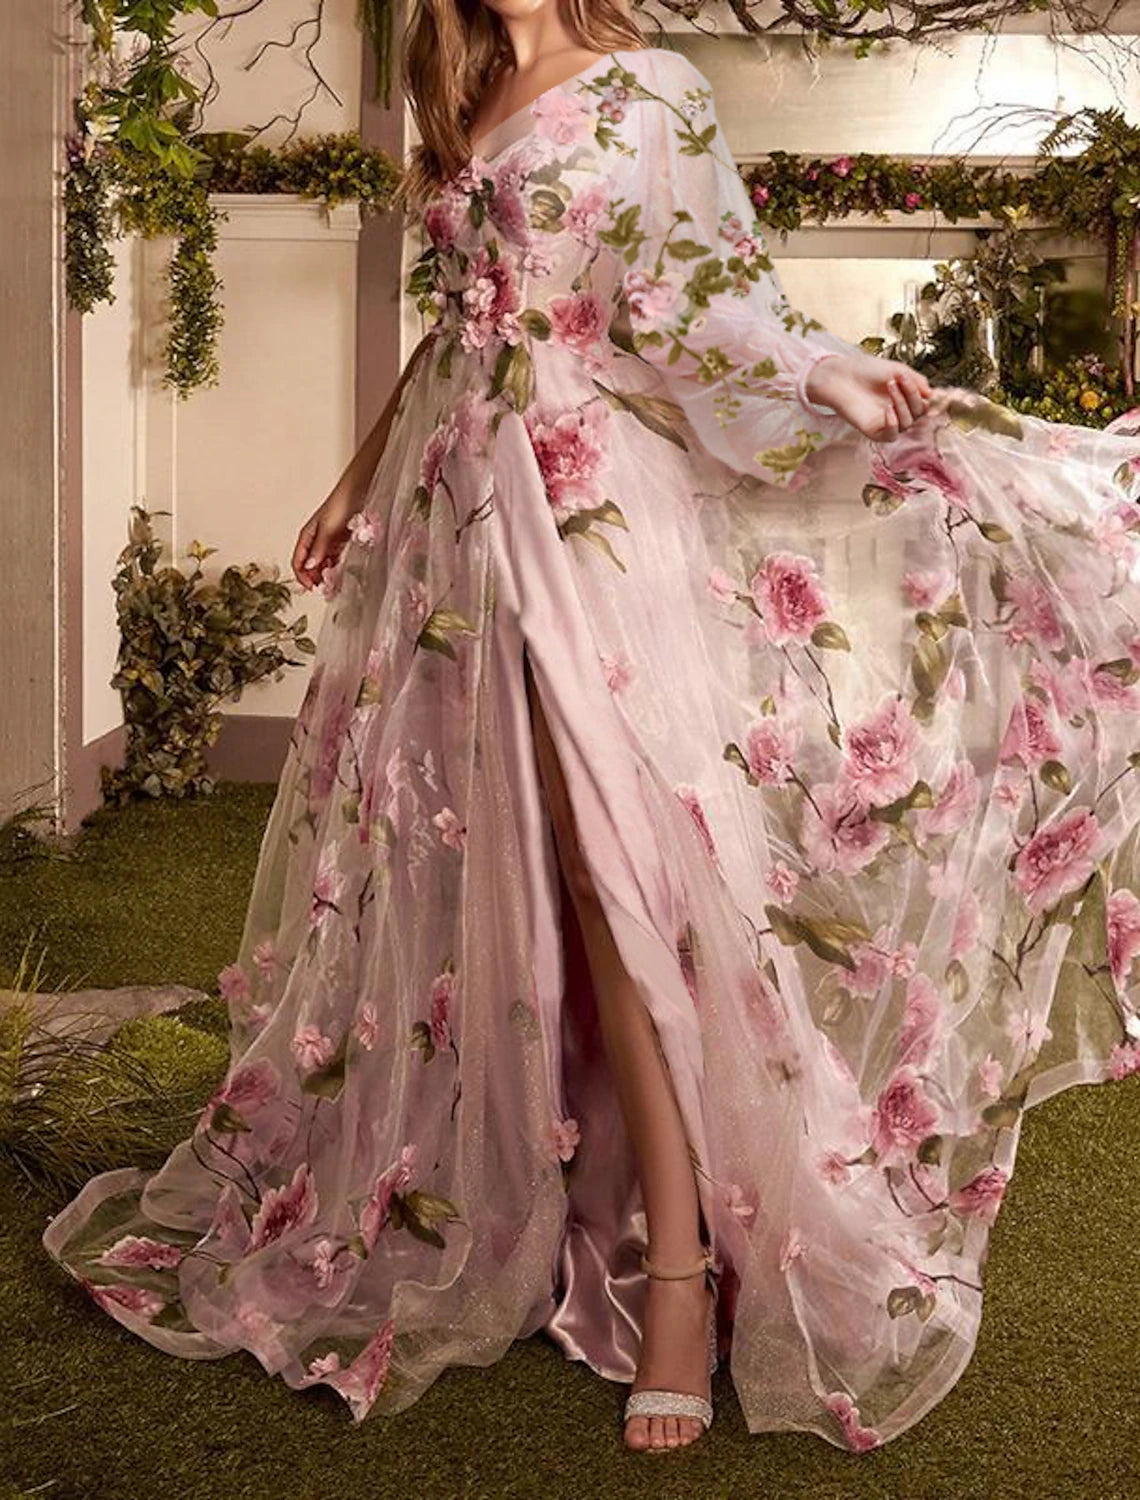 A-Line Prom Dresses Floral Dress Formal Wedding Guest Sweep / Brush Train Long Sleeve One Shoulder Lace with Floral Print